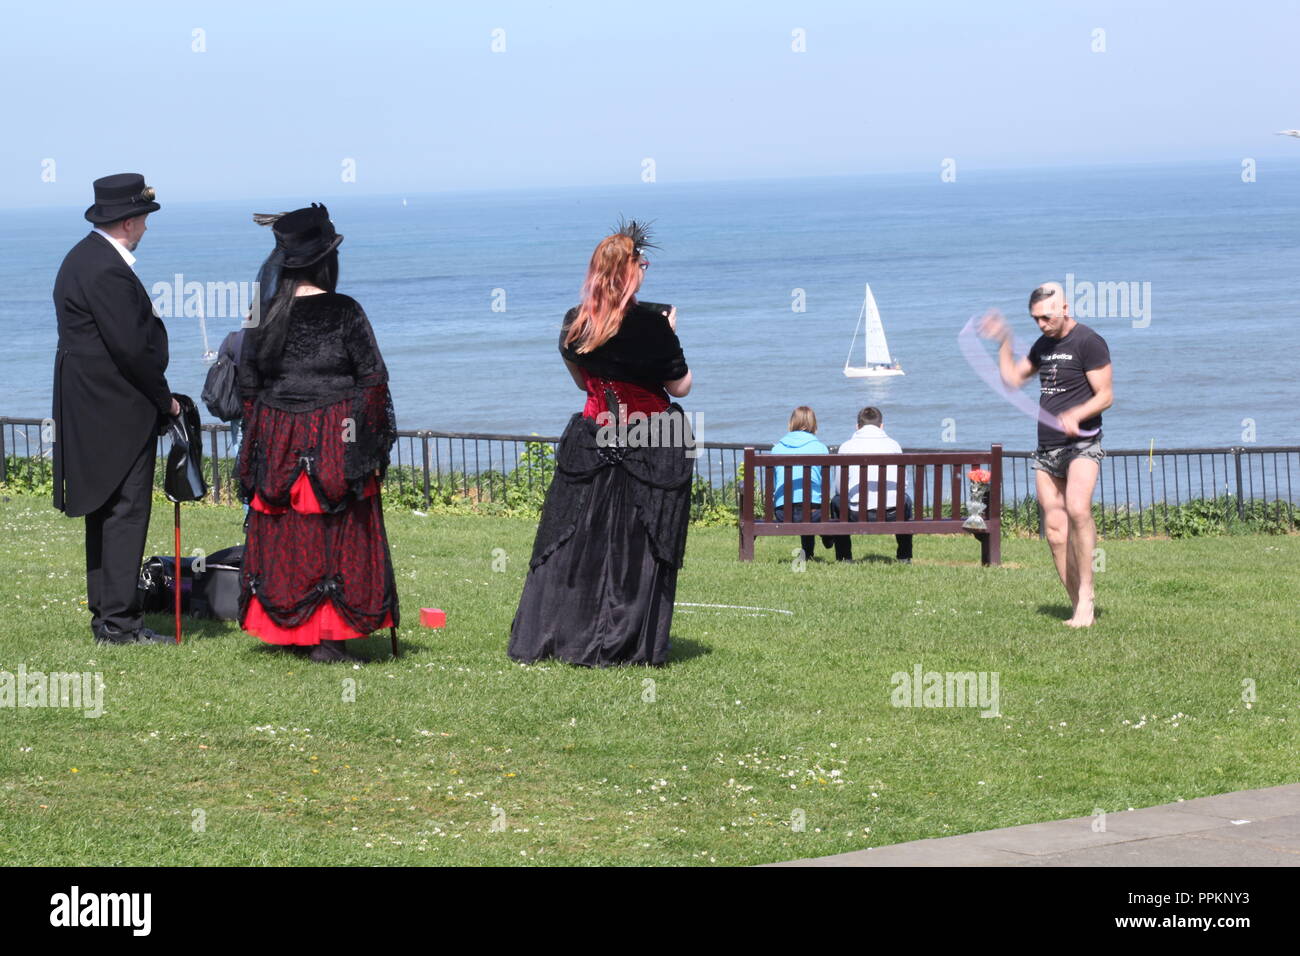 Whitby Goths watching street entertainer on the West Cliff of Whitby during Goth Weekend - beautiful blue sky and sea in the background. Stock Photo